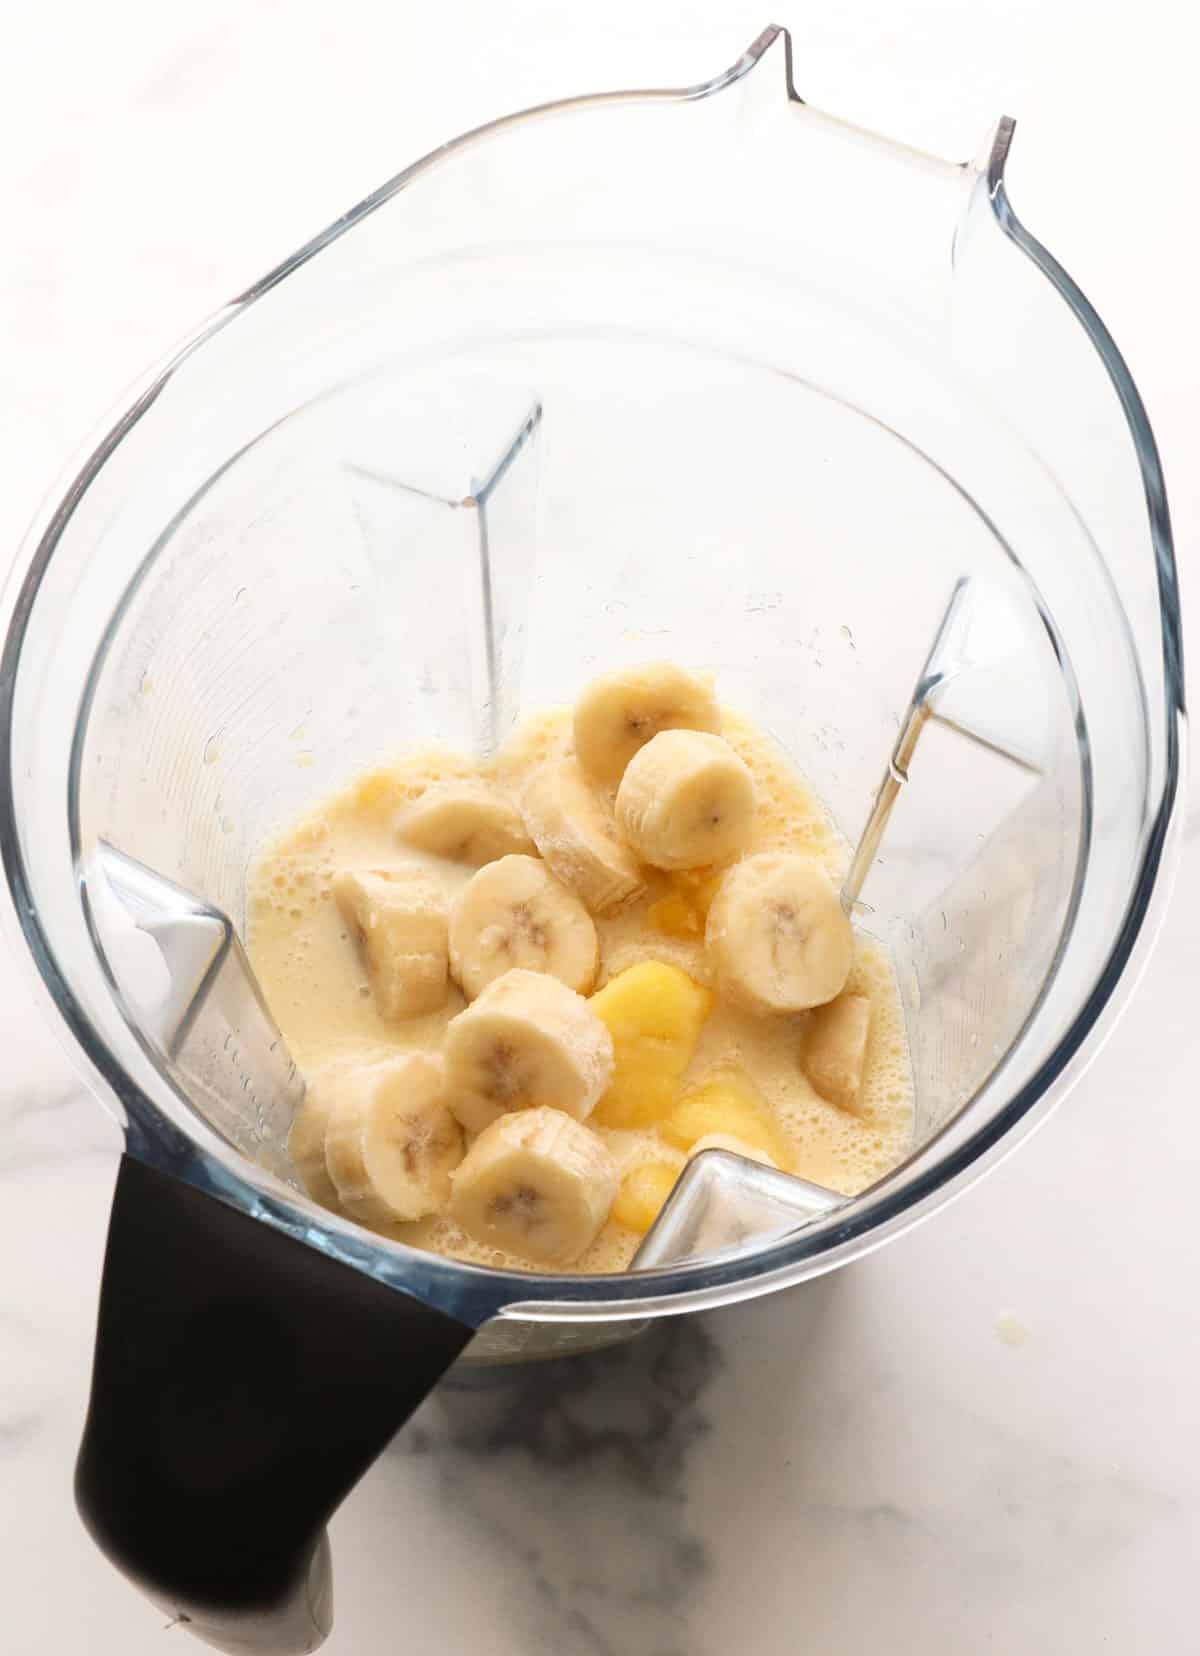 pineapple and frozen banana added to a blender.